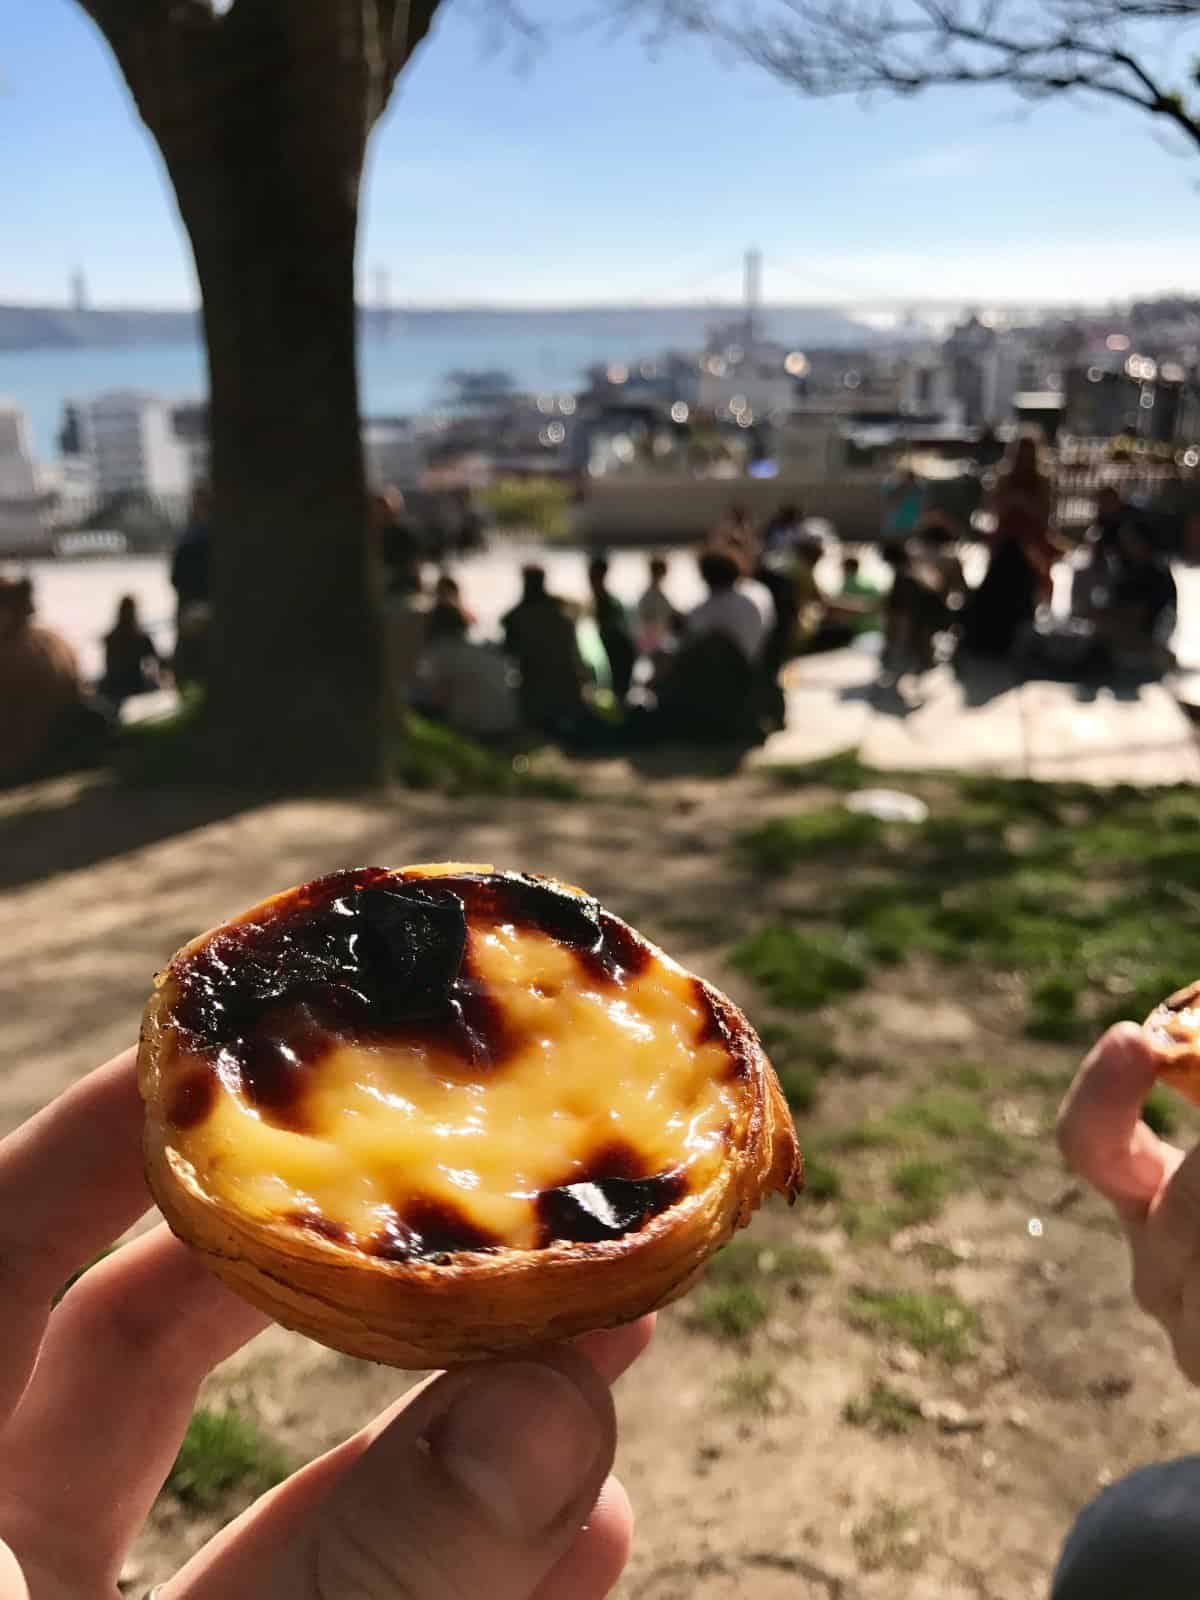 What to do in Lisbon, Portugal - the city has so many amazing scenic views due to being built on several hills